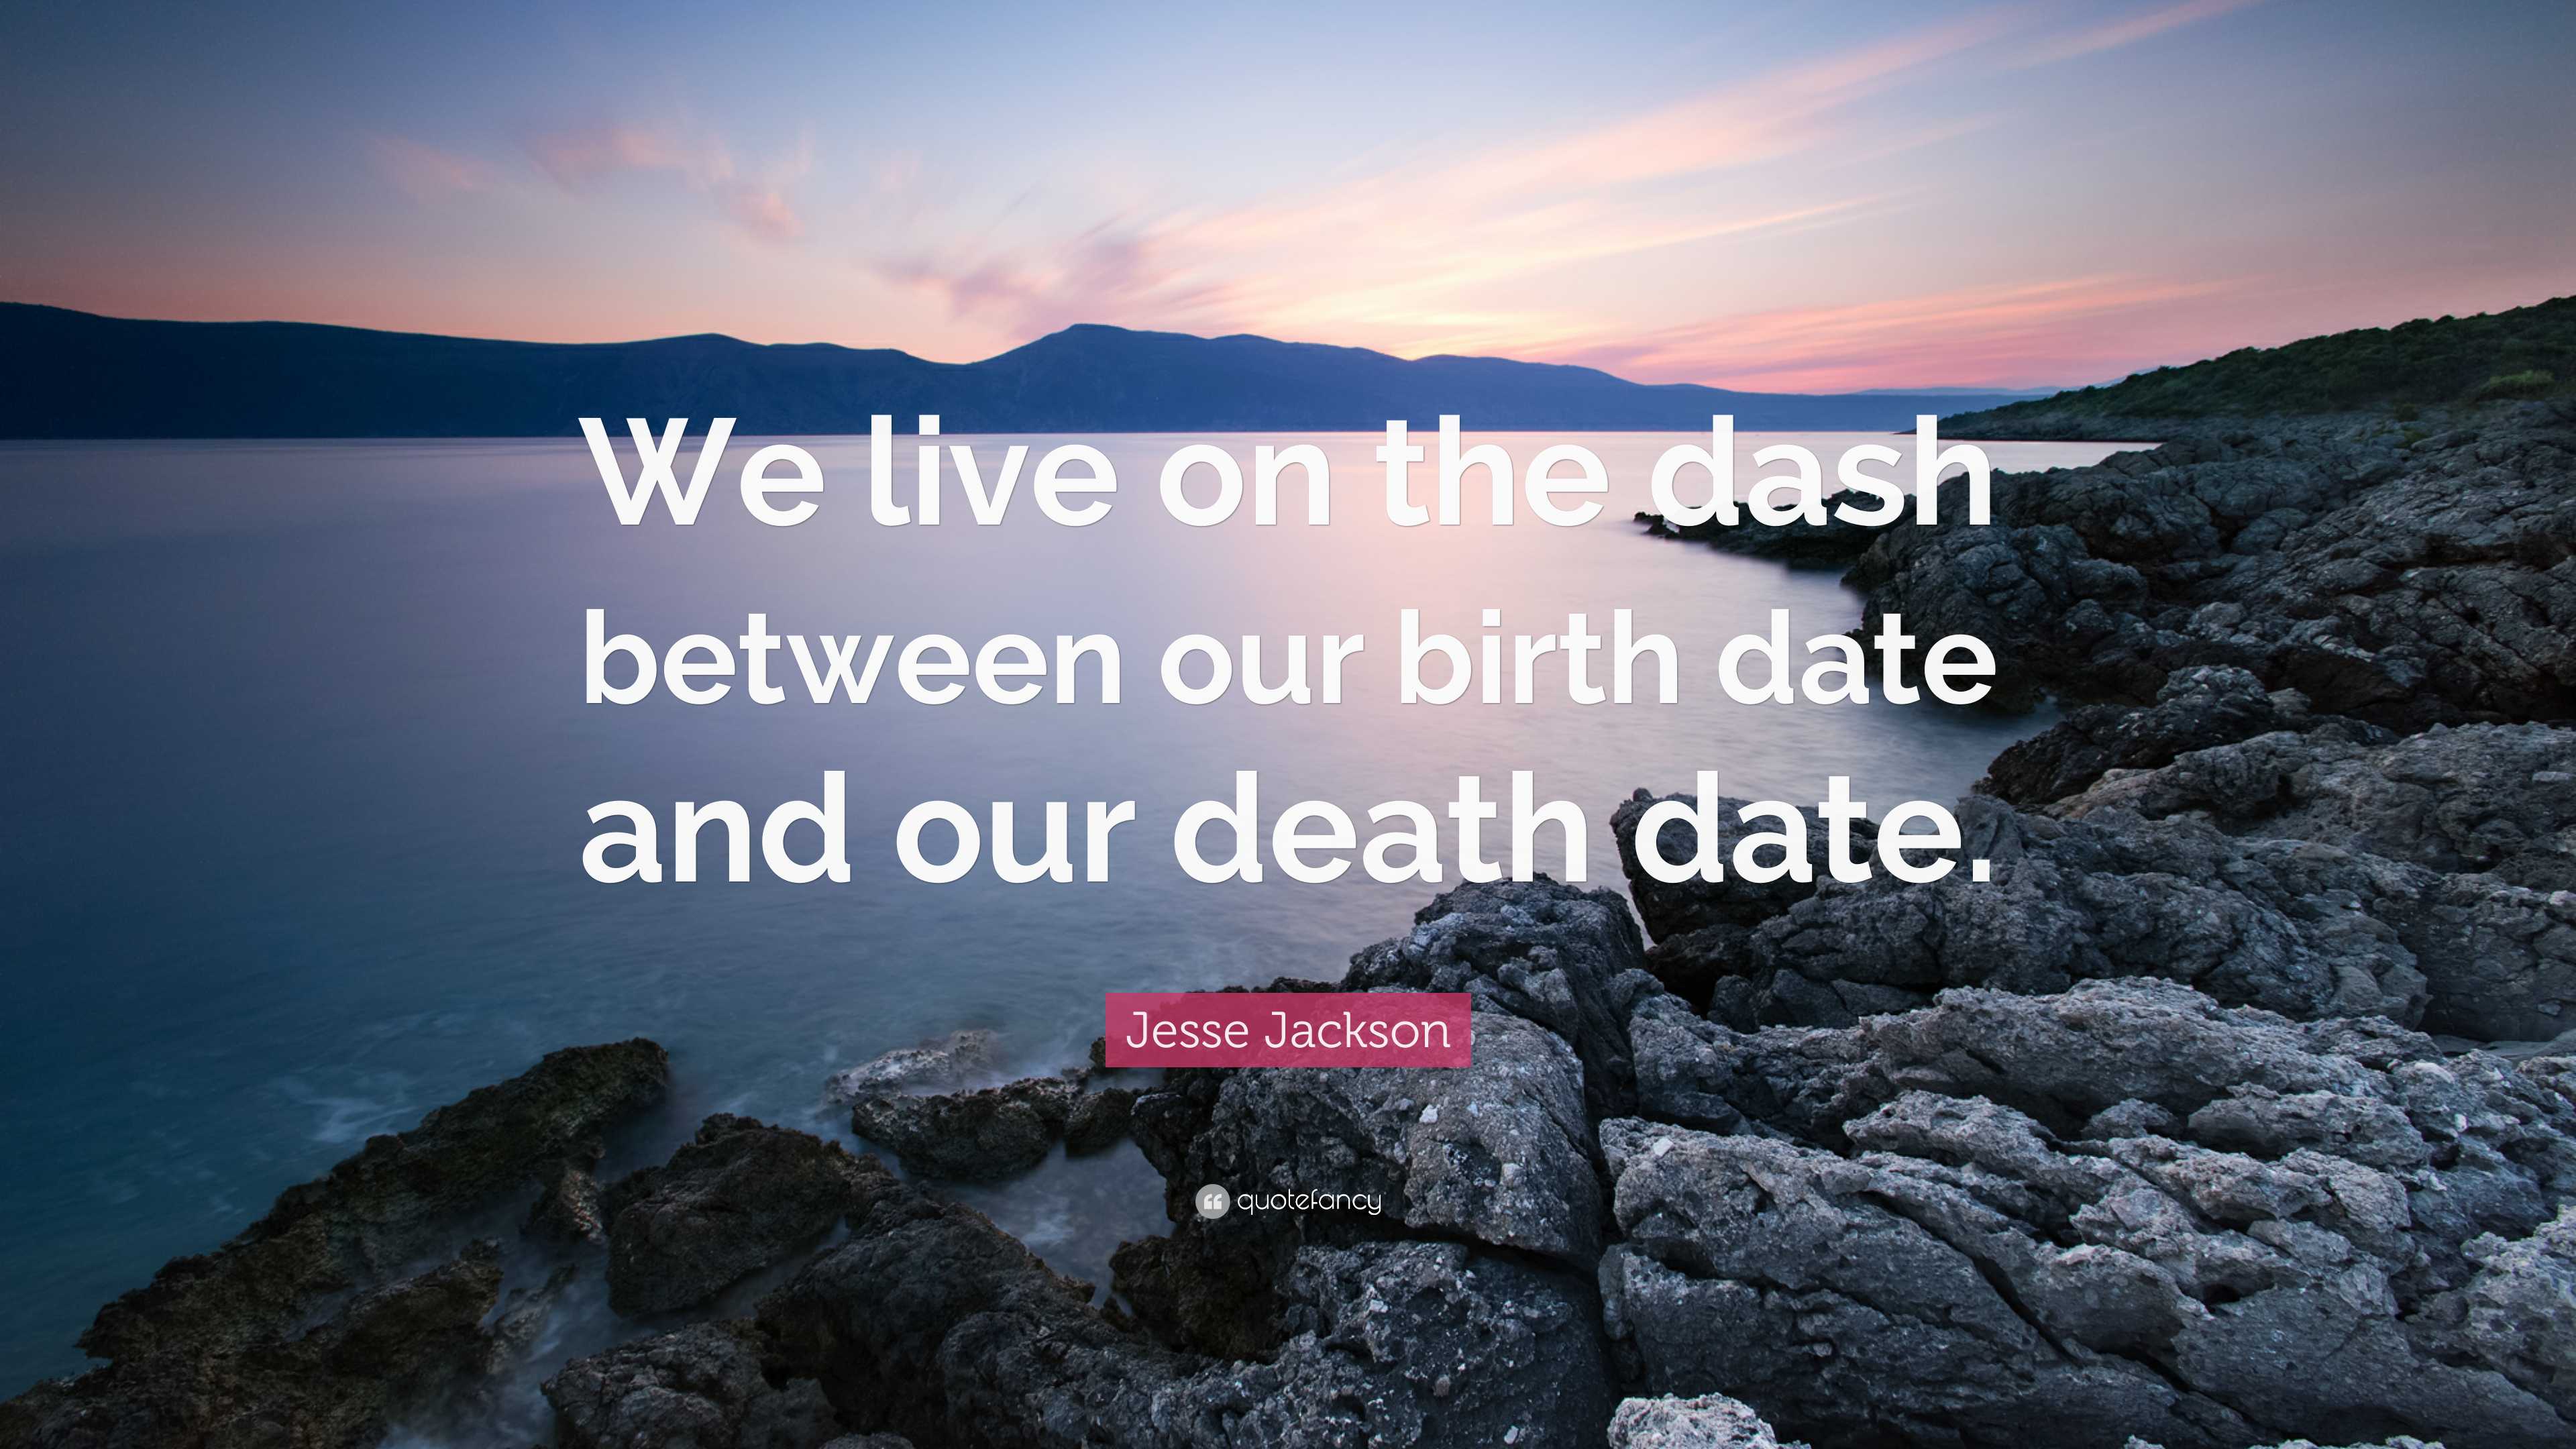 https://quotefancy.com/media/wallpaper/3840x2160/7998239-Jesse-Jackson-Quote-We-live-on-the-dash-between-our-birth-date-and.jpg